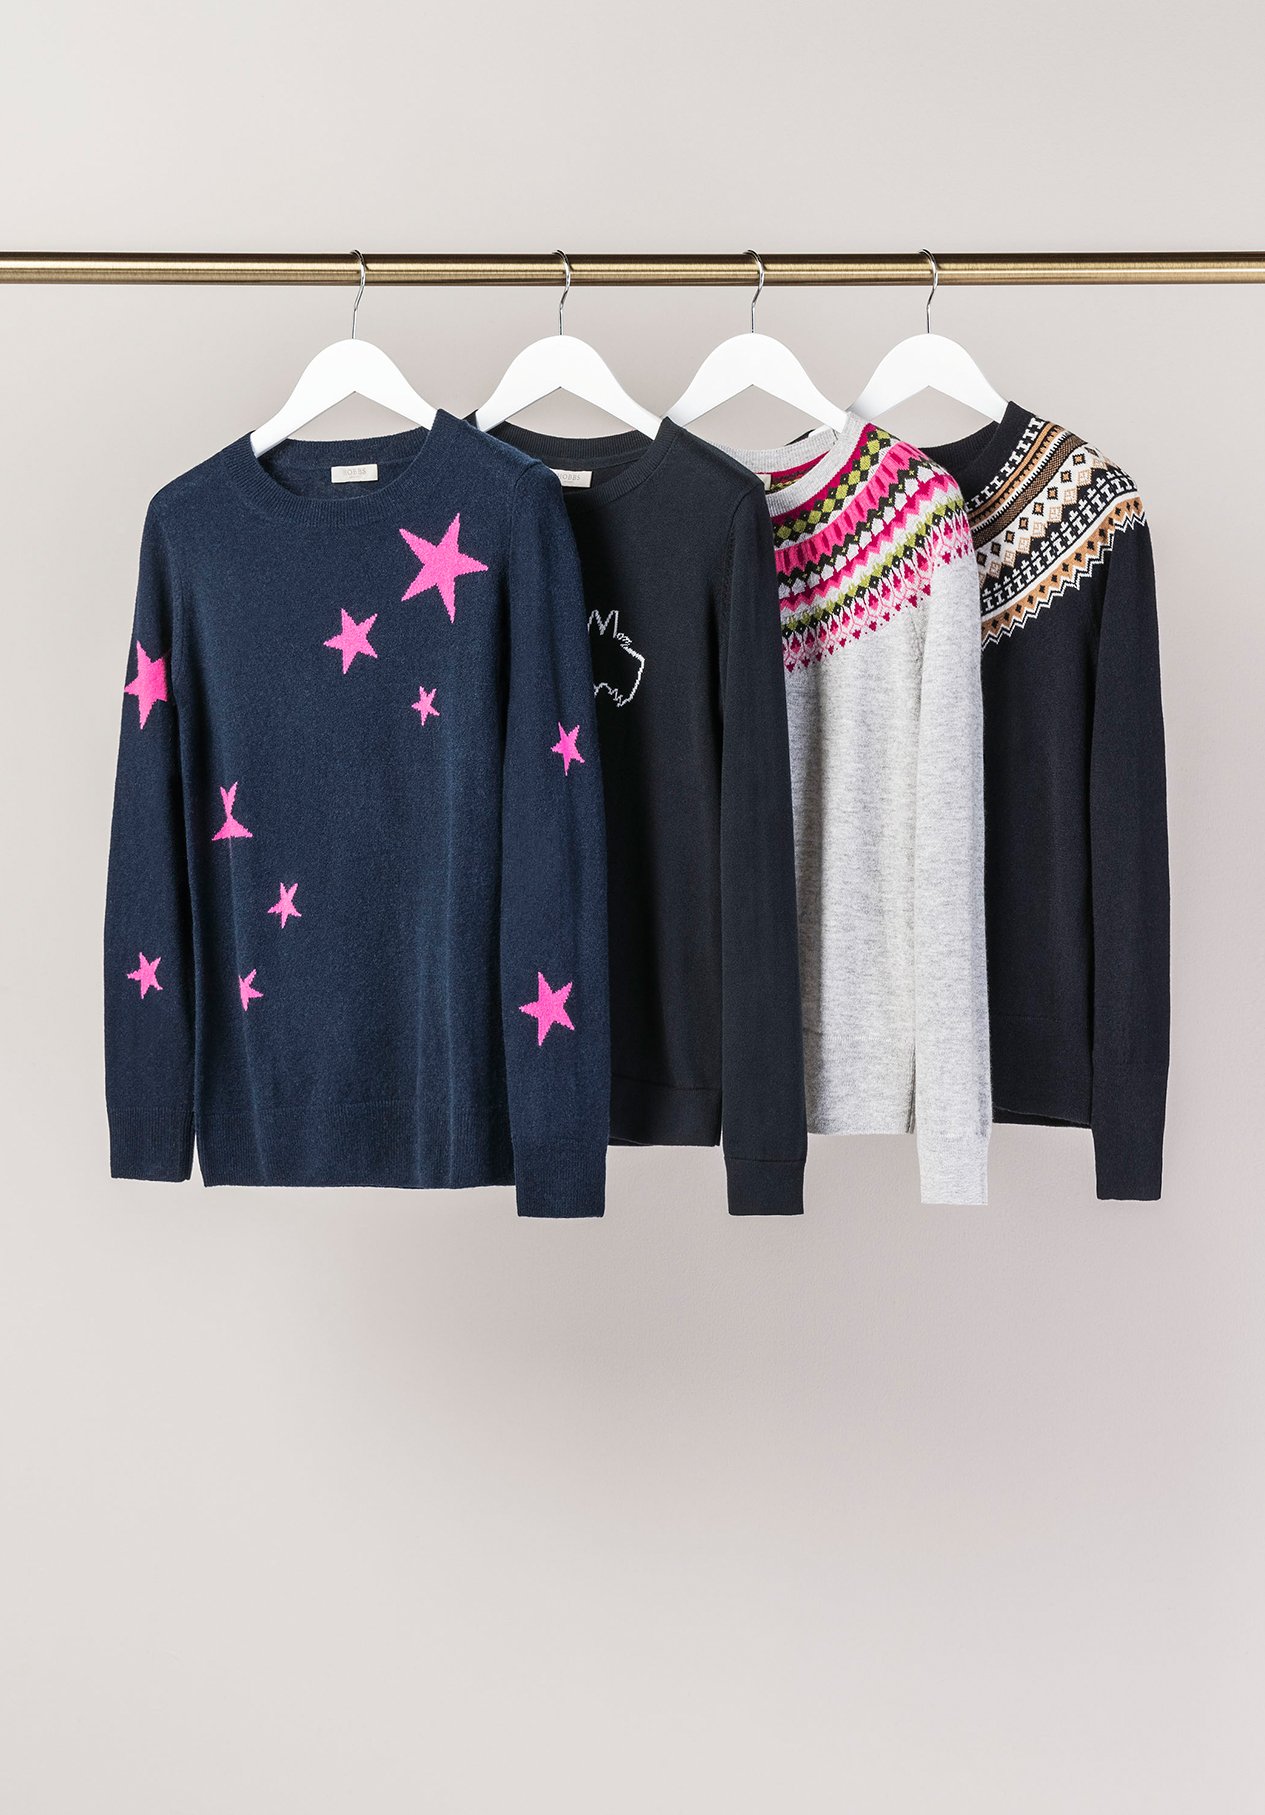 A rail of festive jumpers from Hobbs.